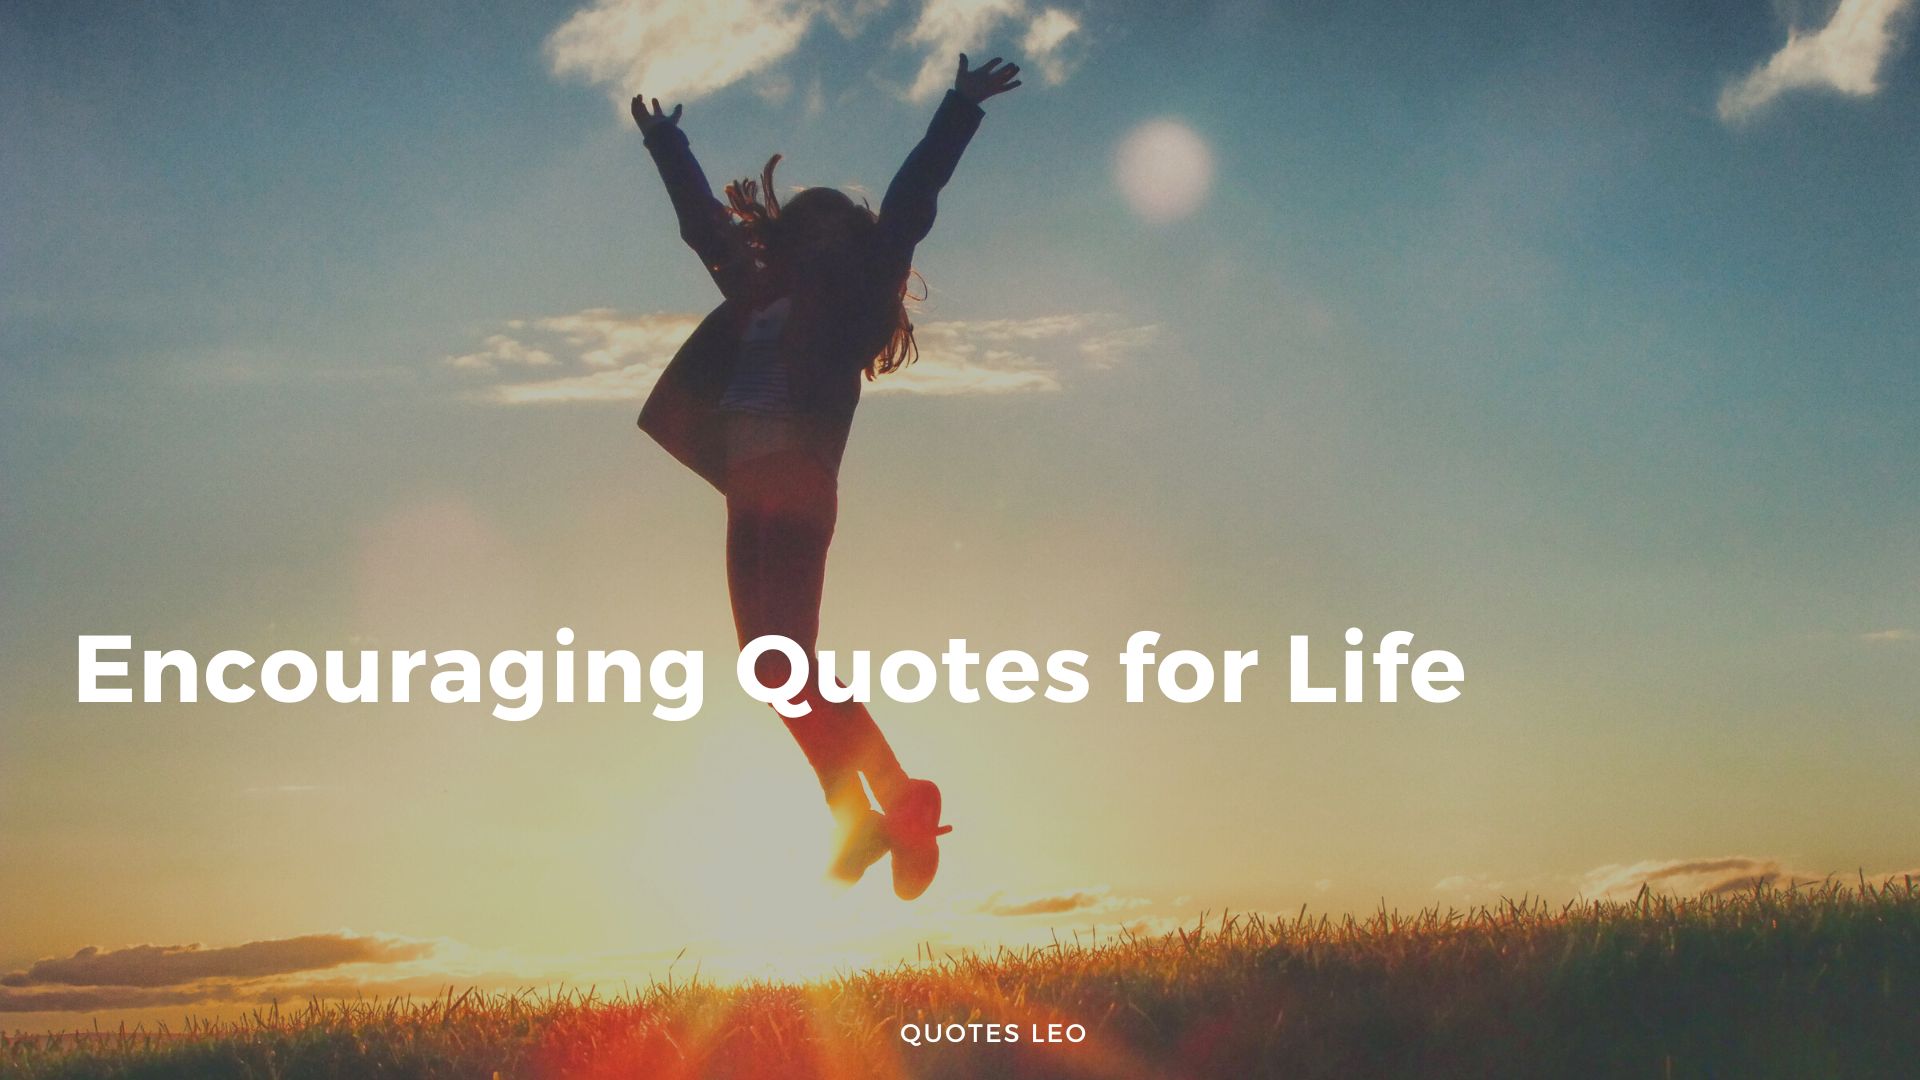 Encouraging Quotes for Life